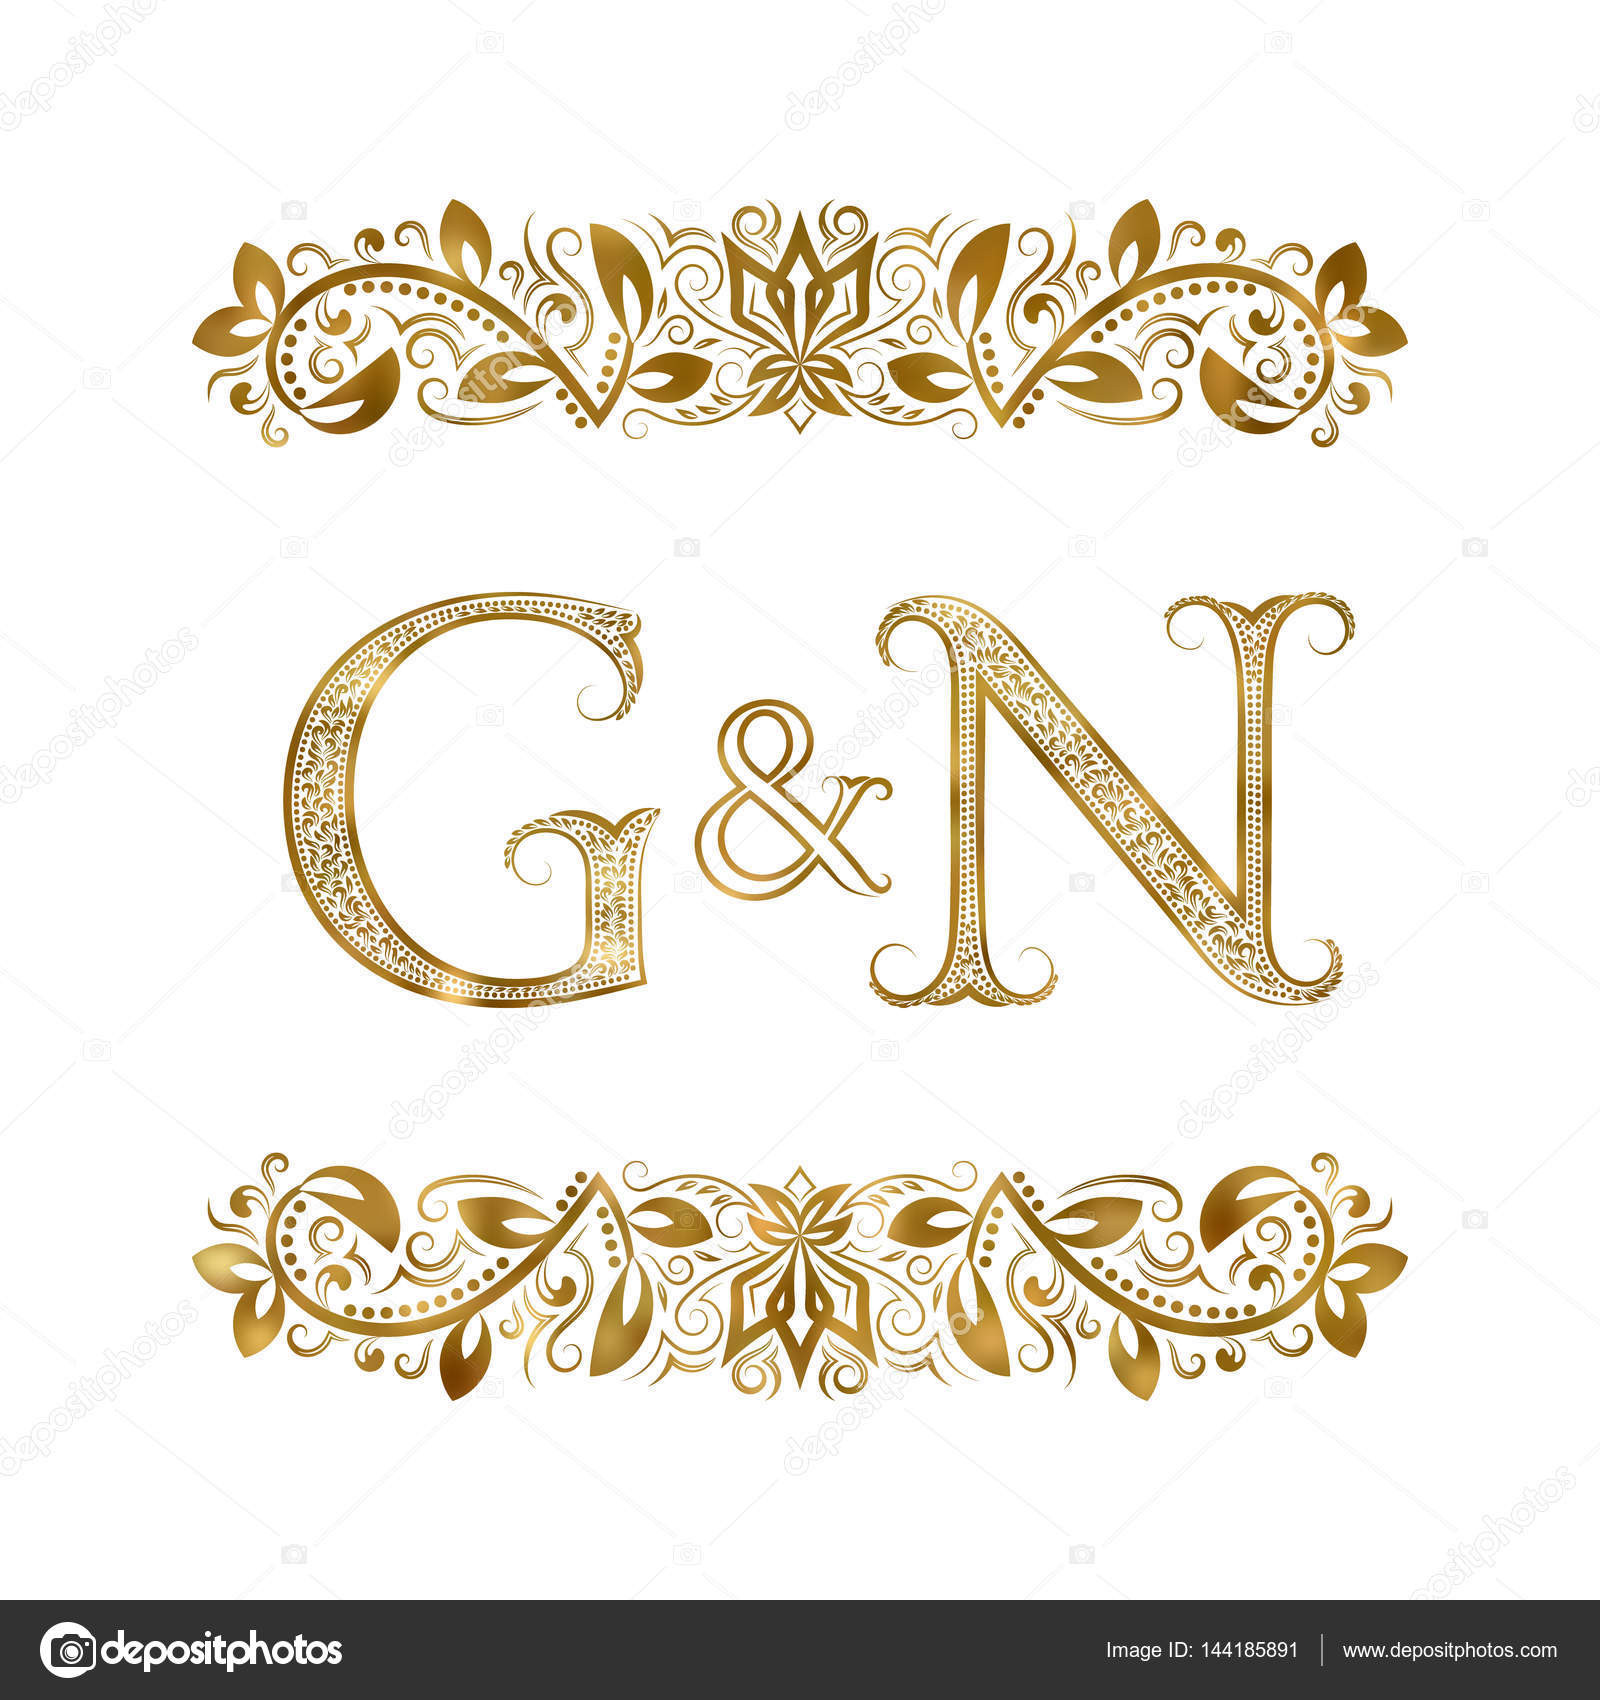 G And N Vintage Initials Logo Symbol The Letters Are Surrounded By Ornamental Elements Wedding Or Business Partners Monogram In Royal Style Vector Image By C Vectordivider Vector Stock